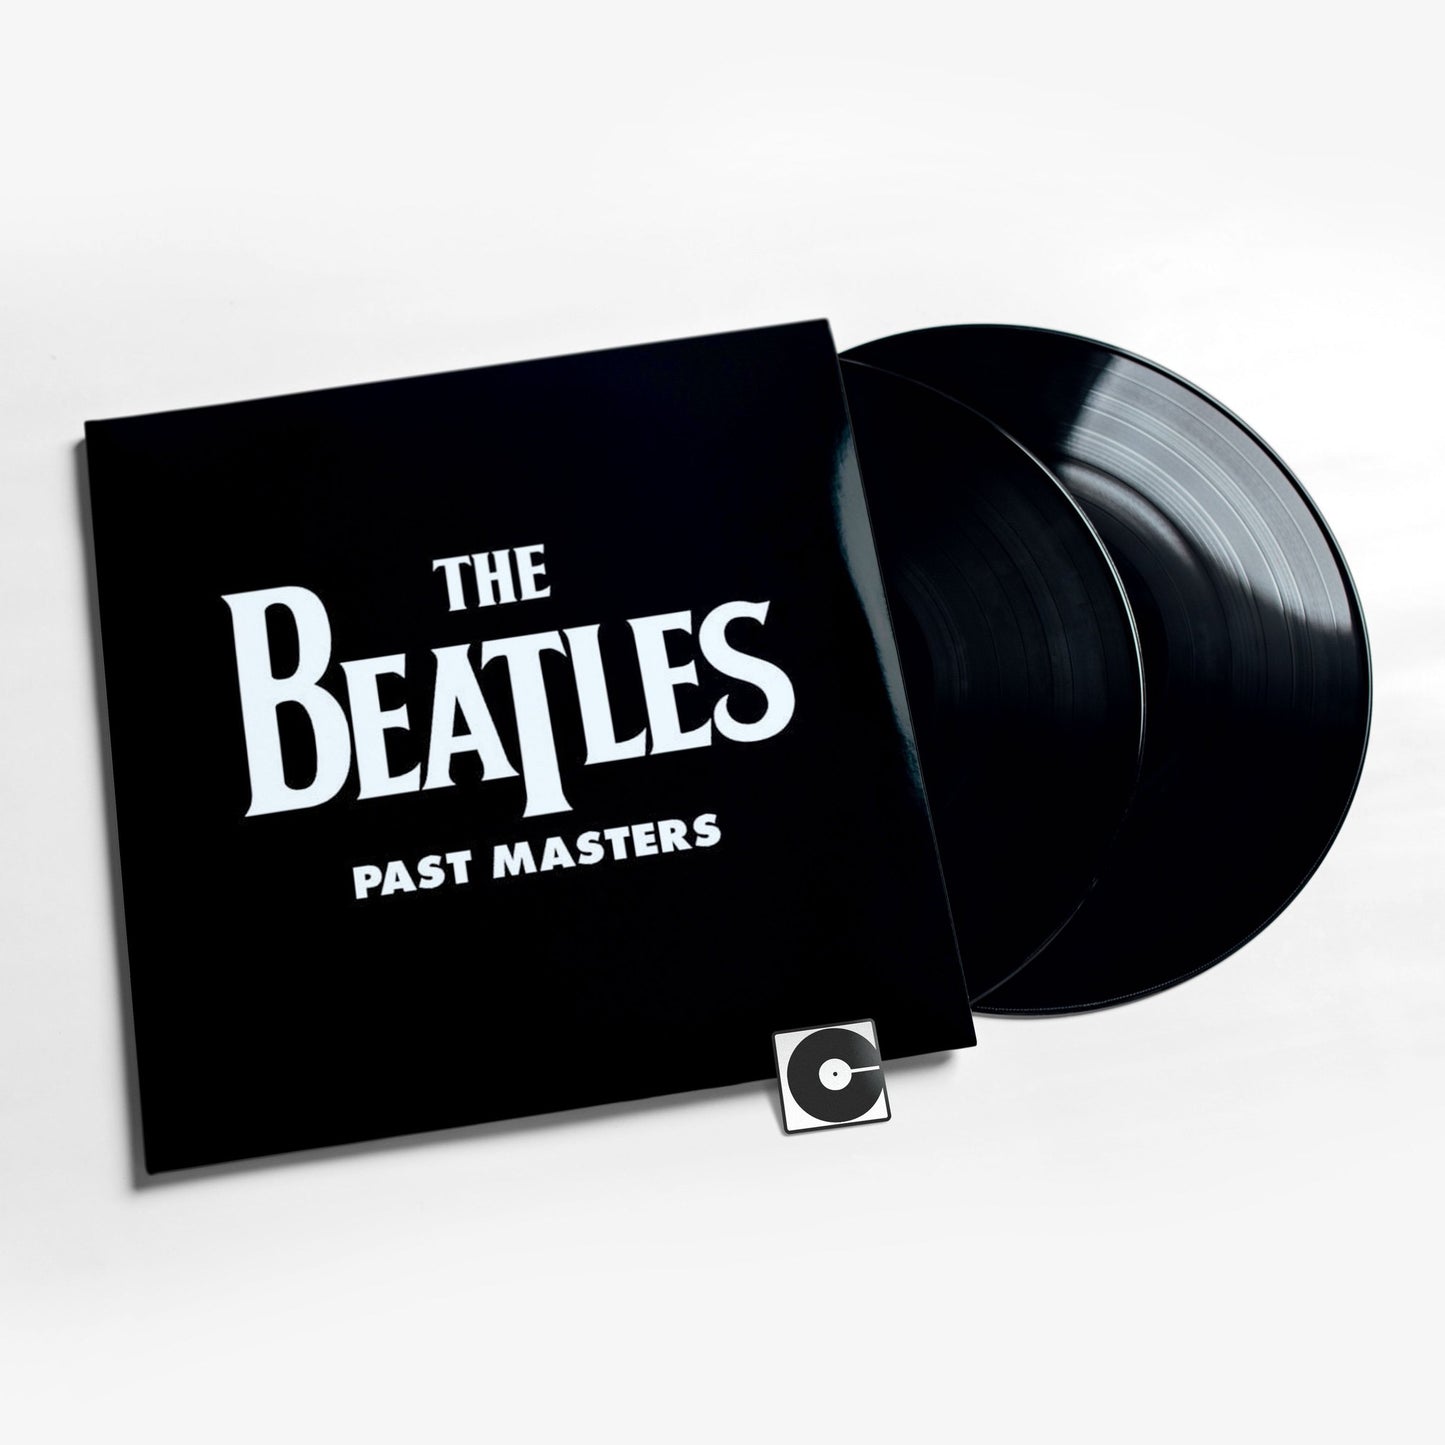 The Beatles - "Past Masters" Stereo